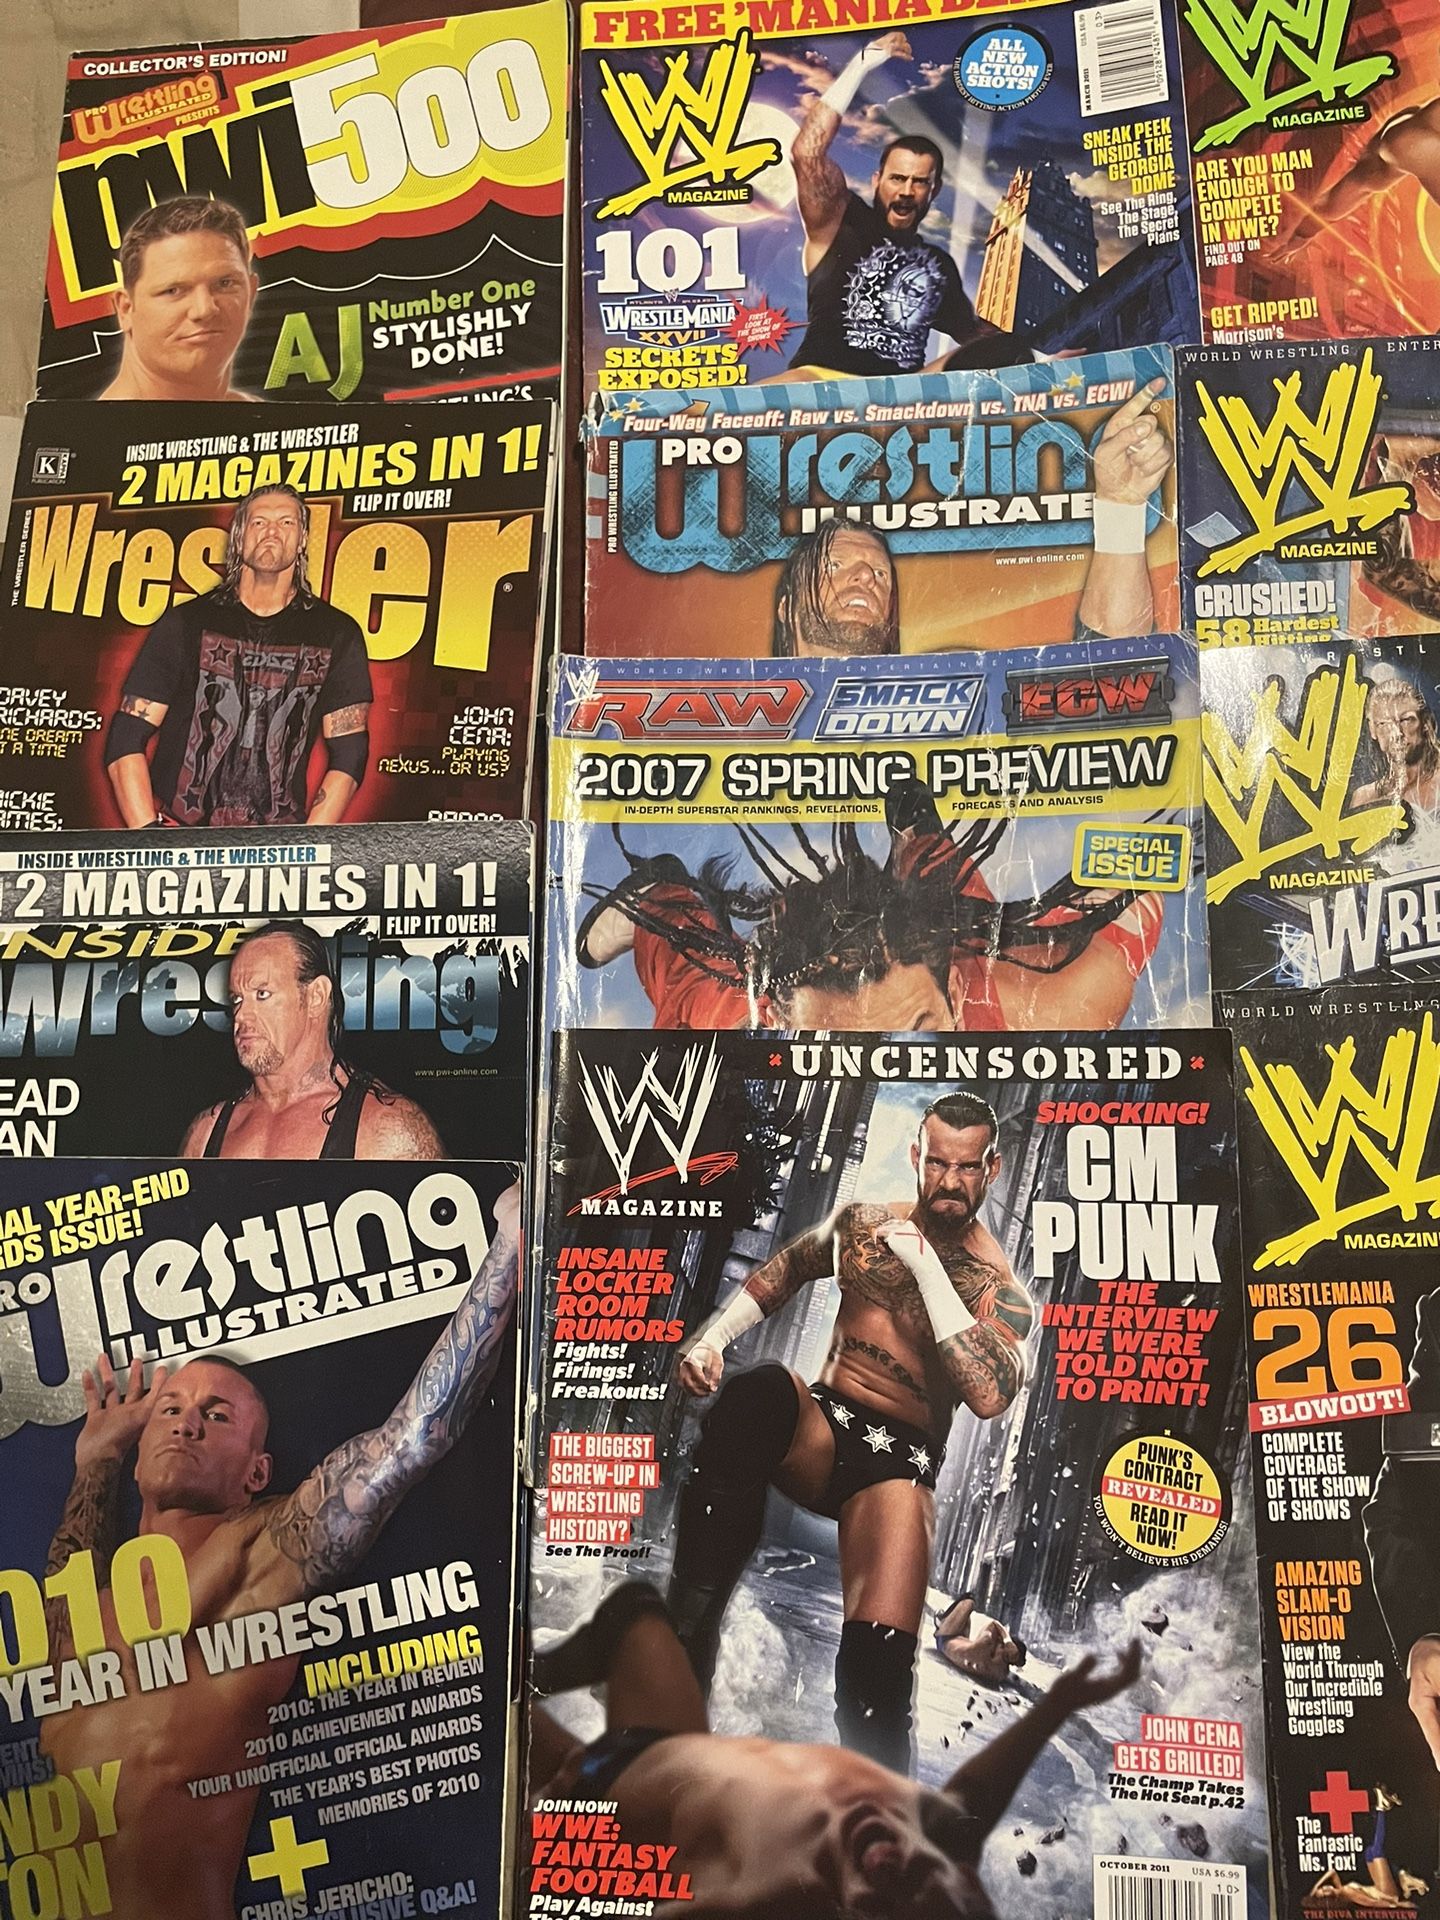 Wwe Magazines And dvds 